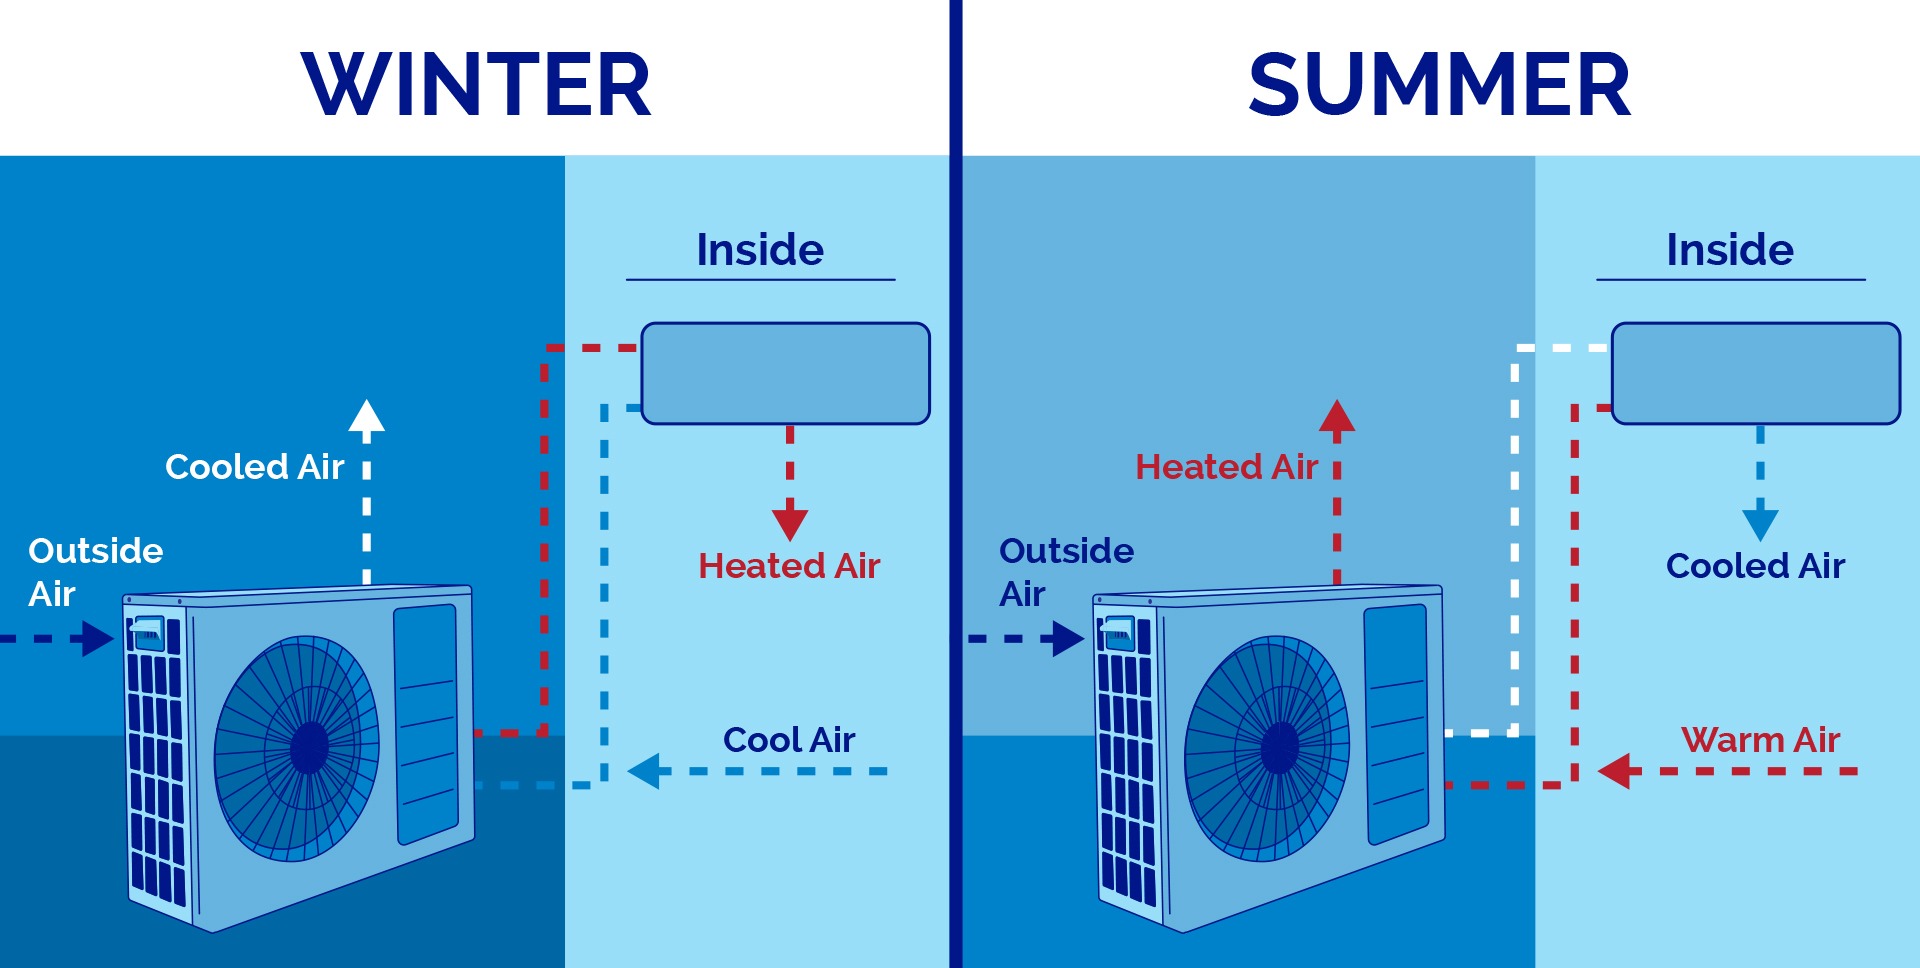 Illustrated diagrams showing how heat pumps work. In the winter, heat is extracted from the outside air and transferred into the home, while cool air from inside the home is transferred outside. In the summer, warm air from inside the home is transferred out of the home, while cool air is transferred into the home. 